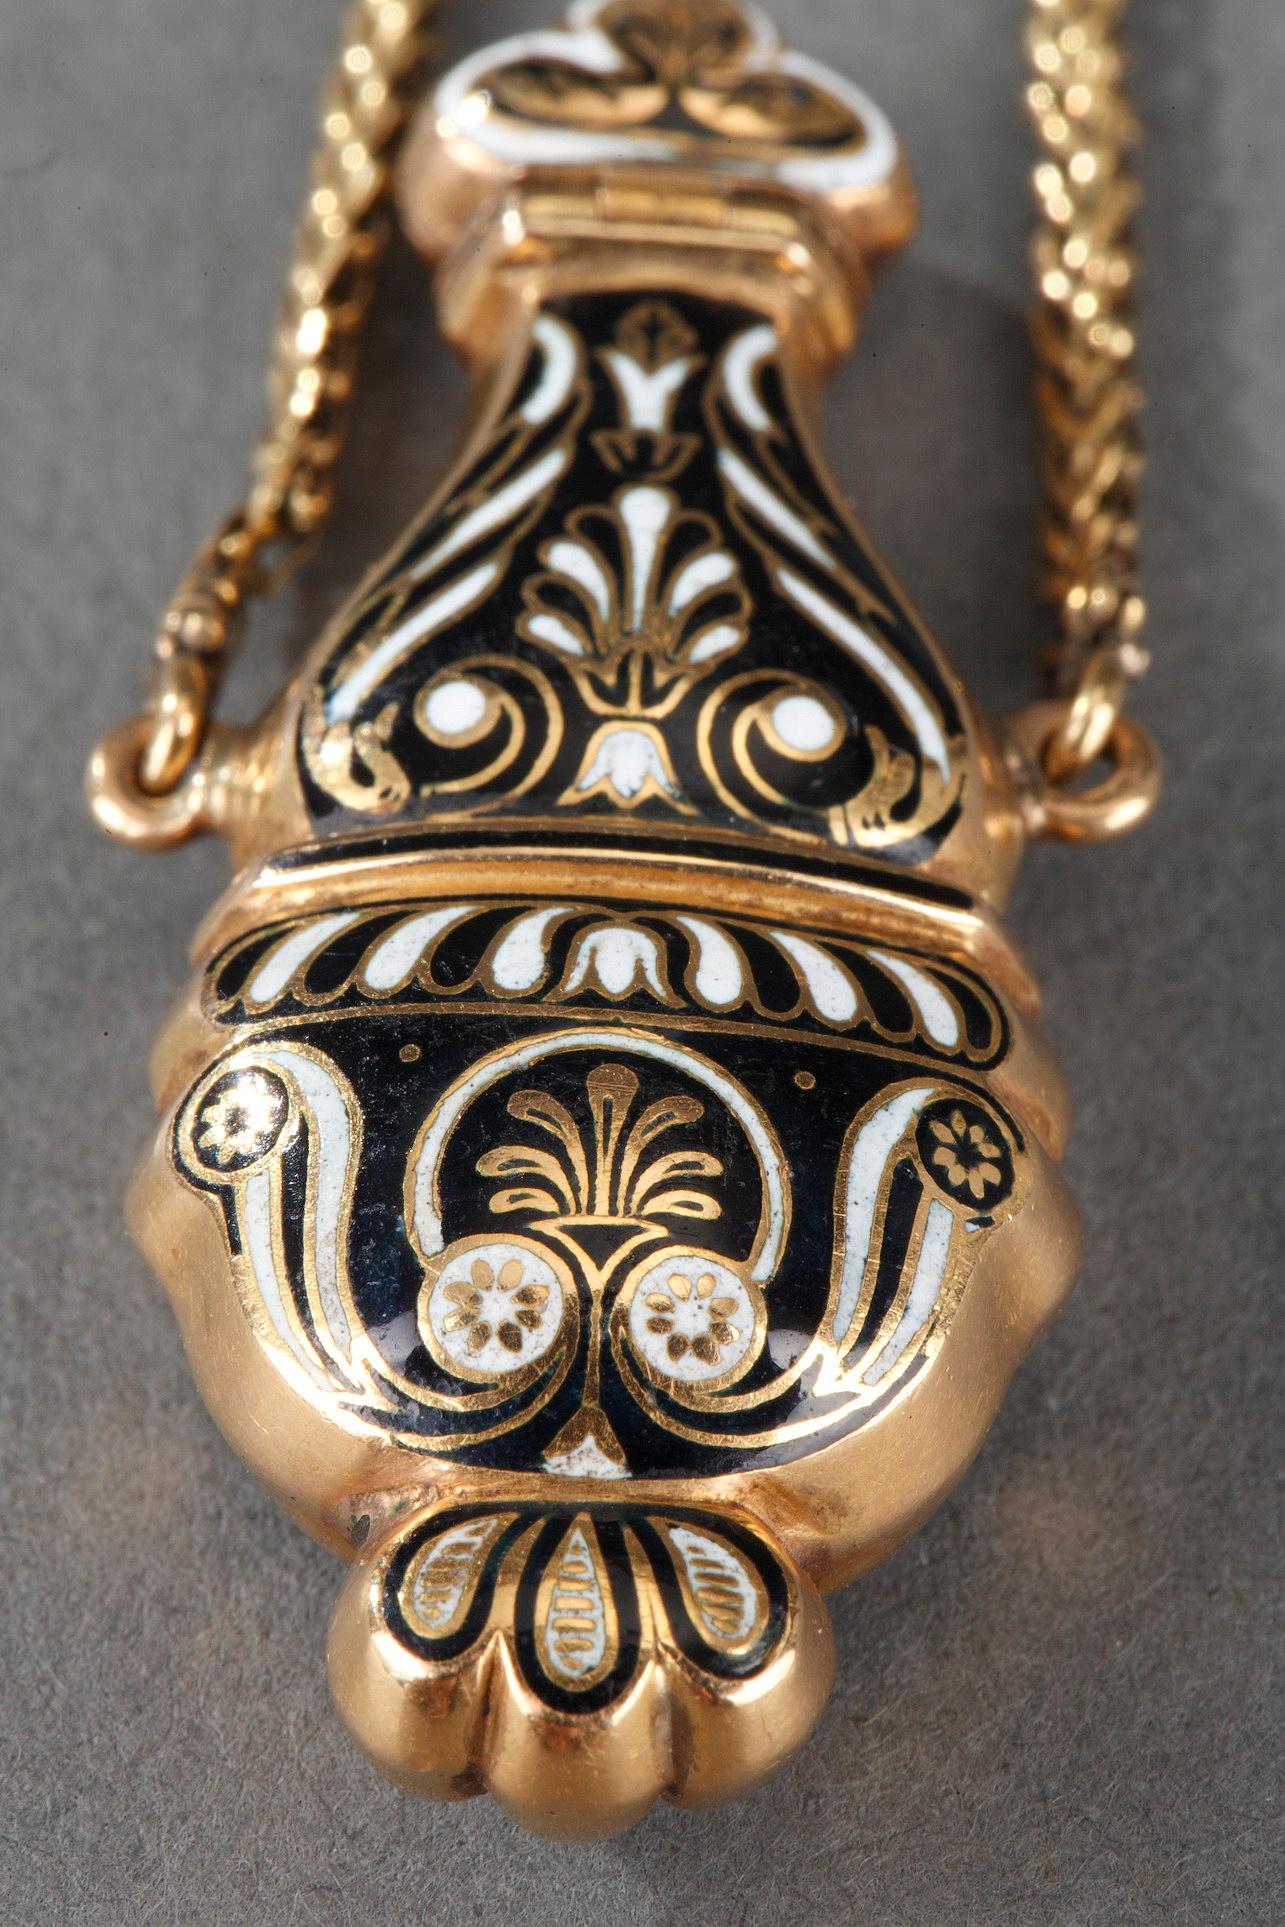 Gold and Enamel Perfum Bottle, Restauration Period, Circa 1830-1840 For Sale 3